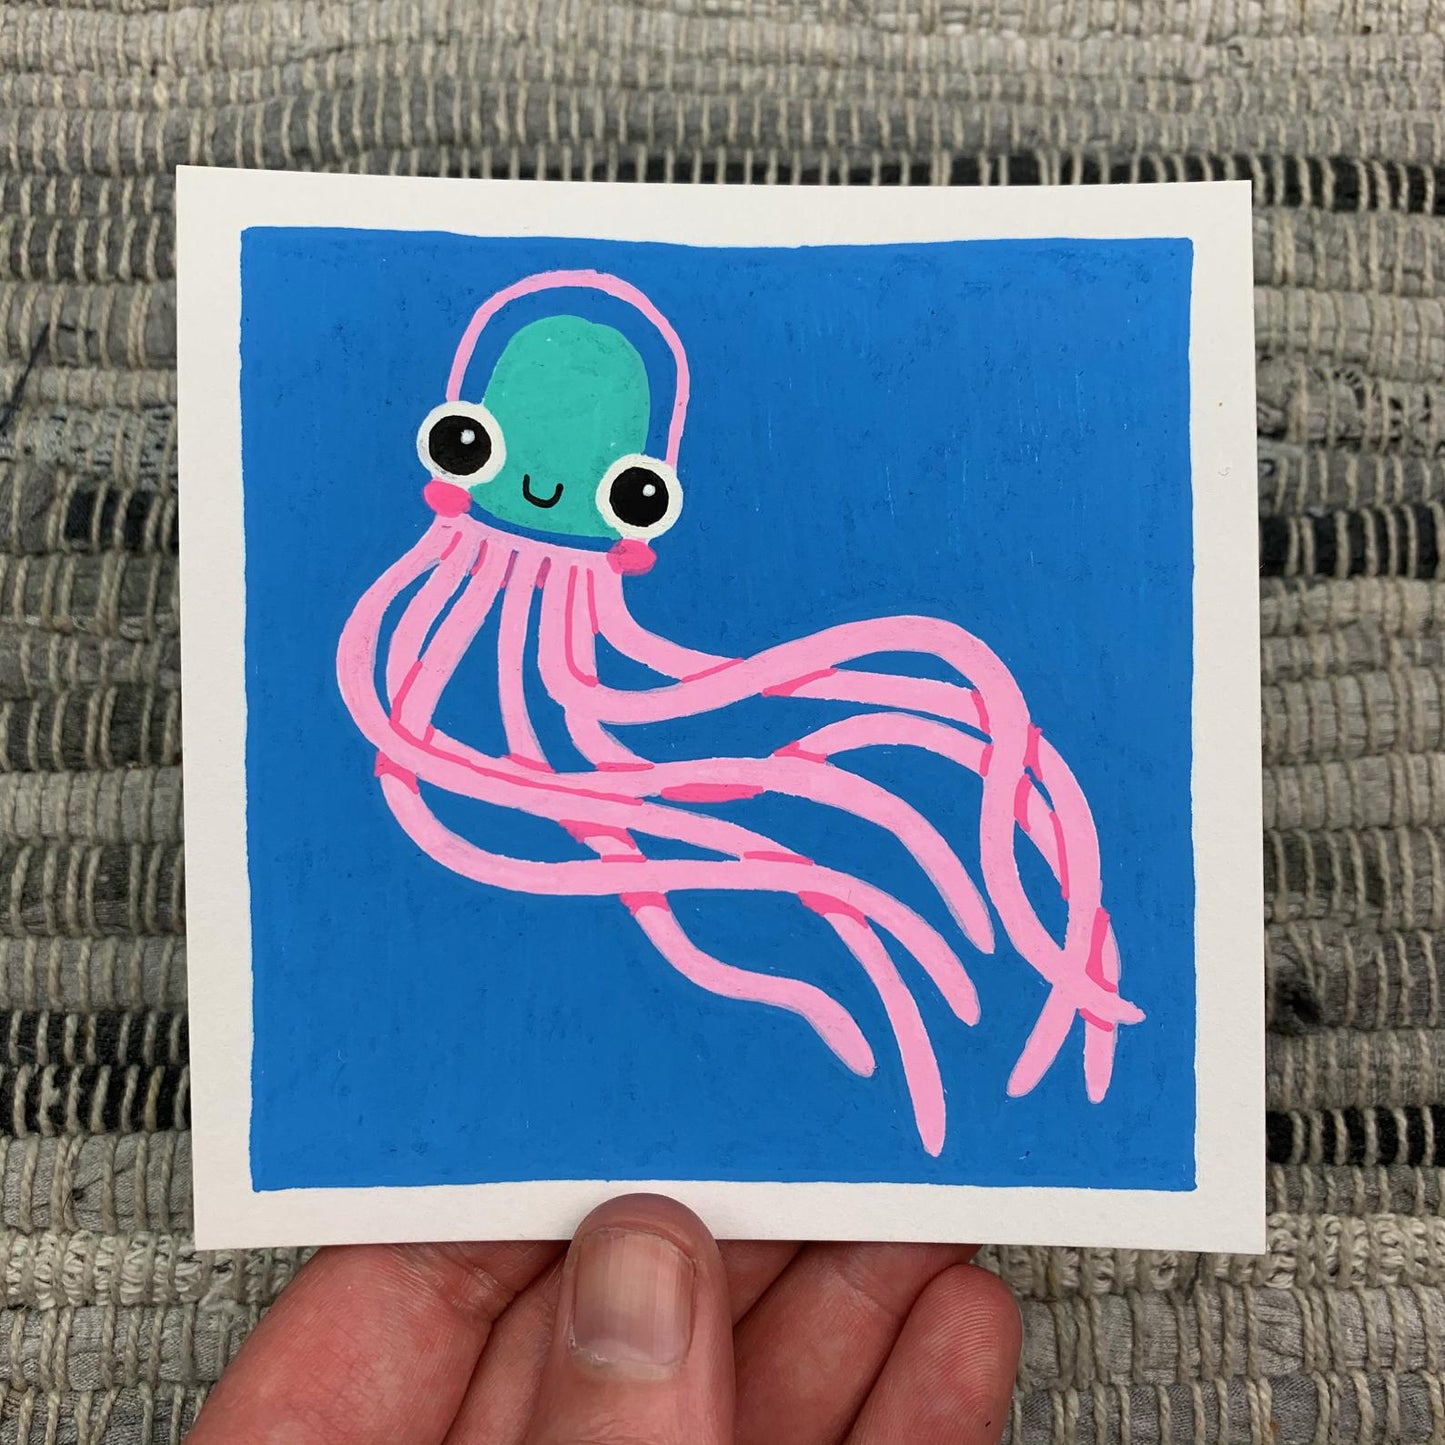 Original artwork of a cute pink jellyfish floating on a blue background. Materials used: Uni-Posca paint markers.